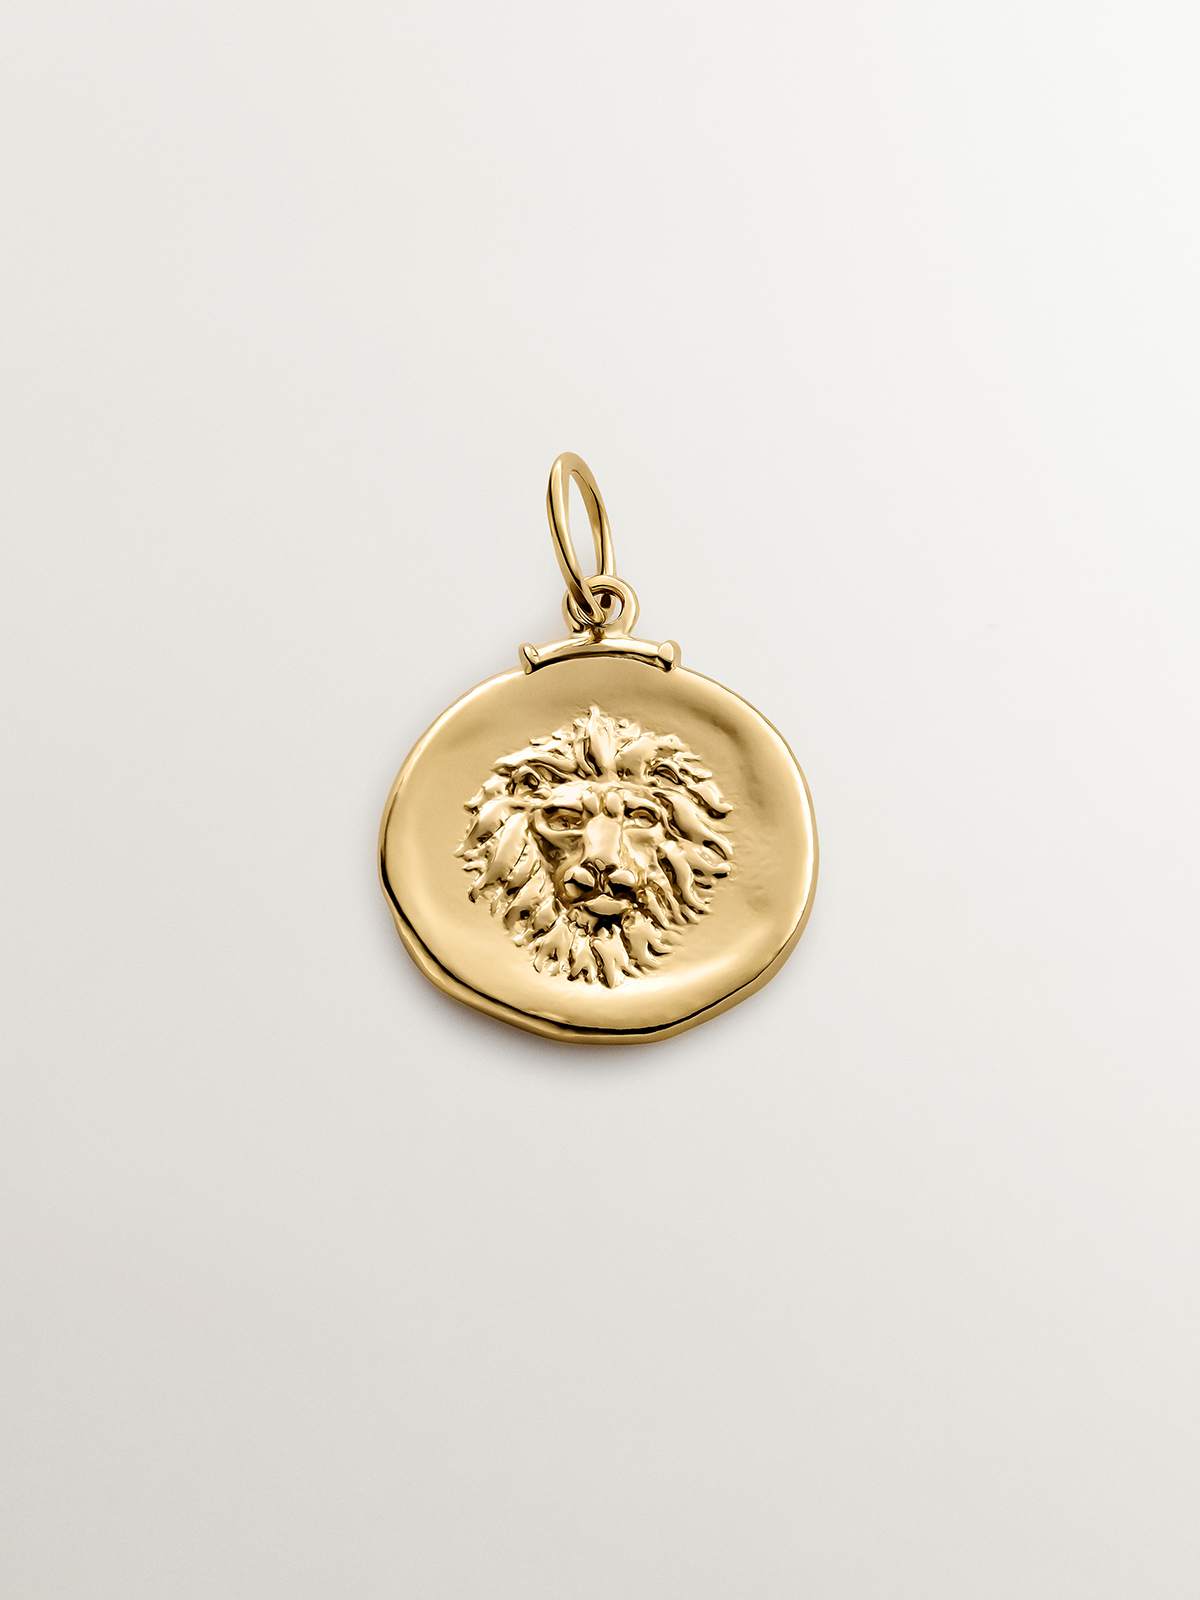 925 Silver Leo Charm bathed in 18K yellow gold